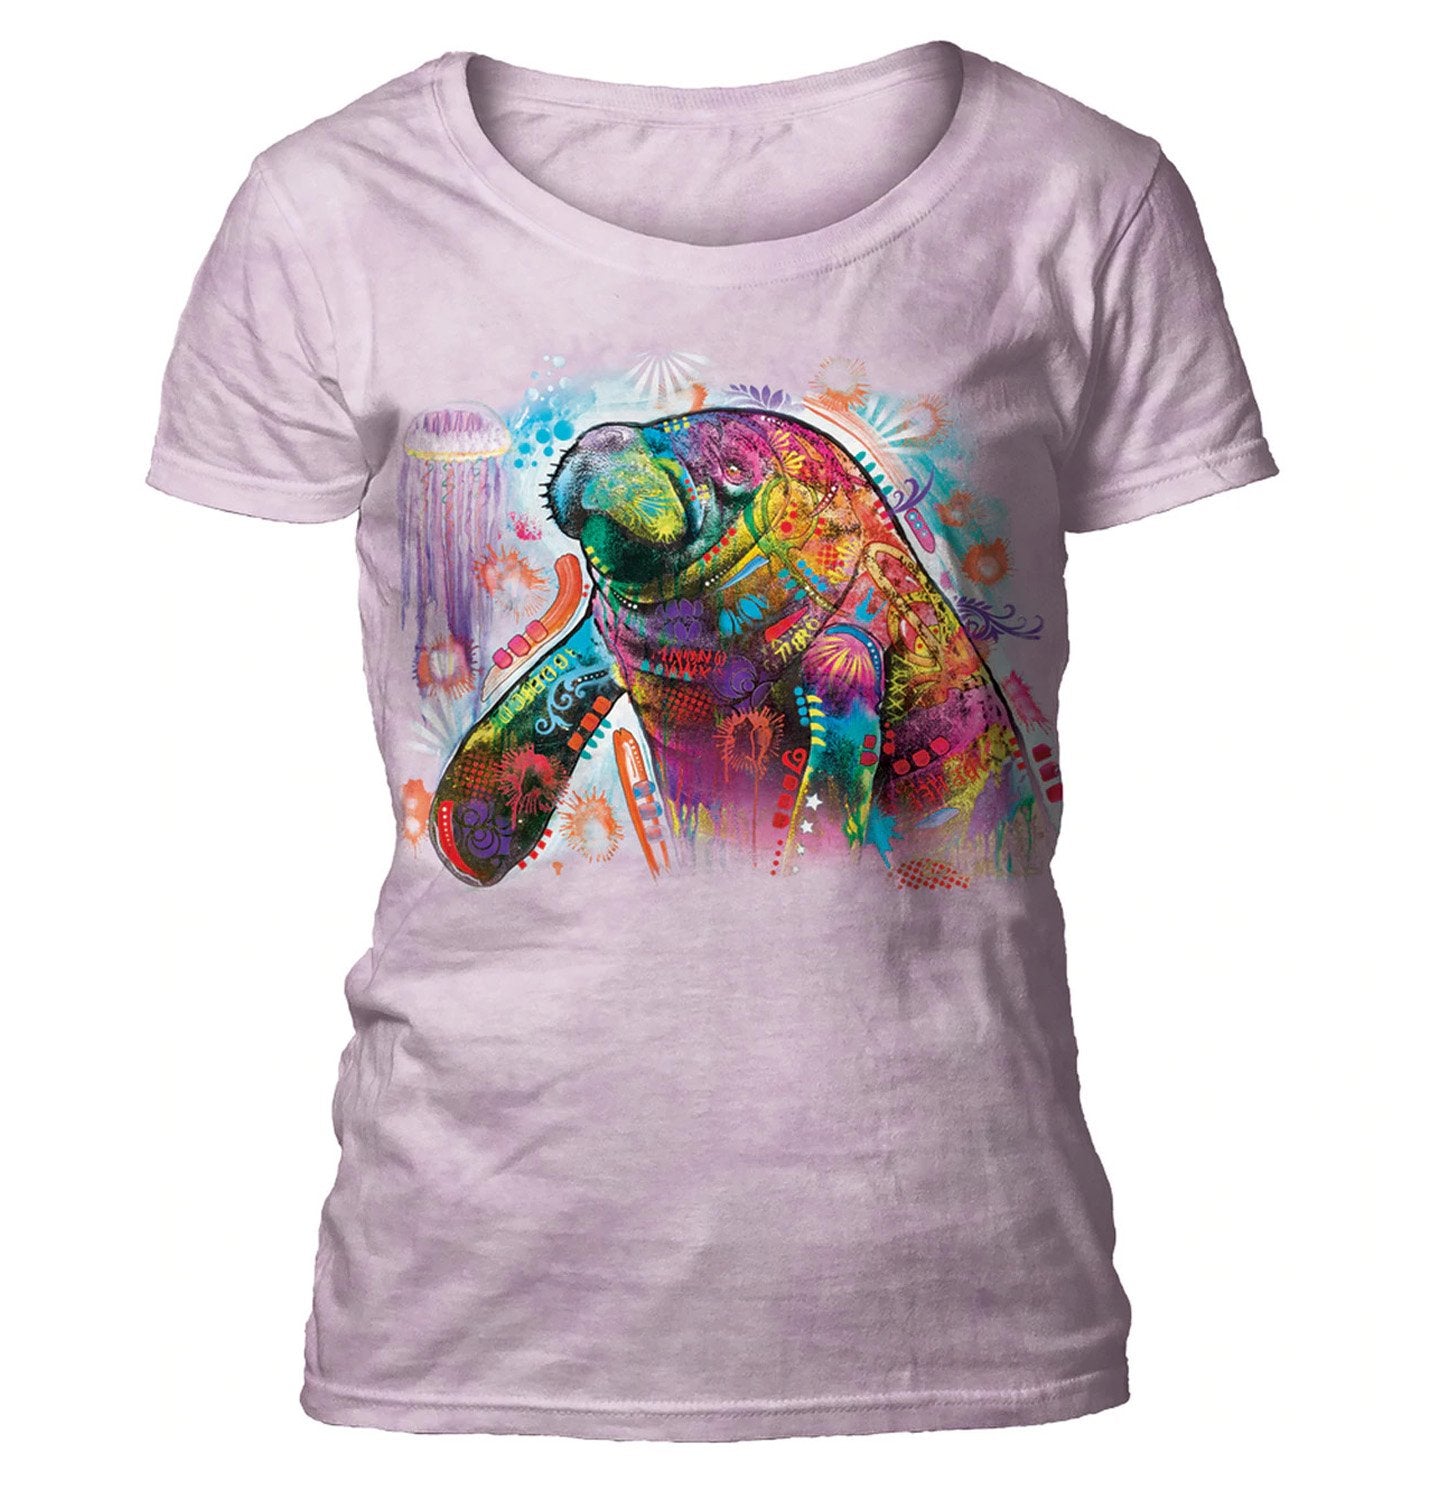 The Mountain - Russo Manatee - Women's Scoop Neck T-Shirt